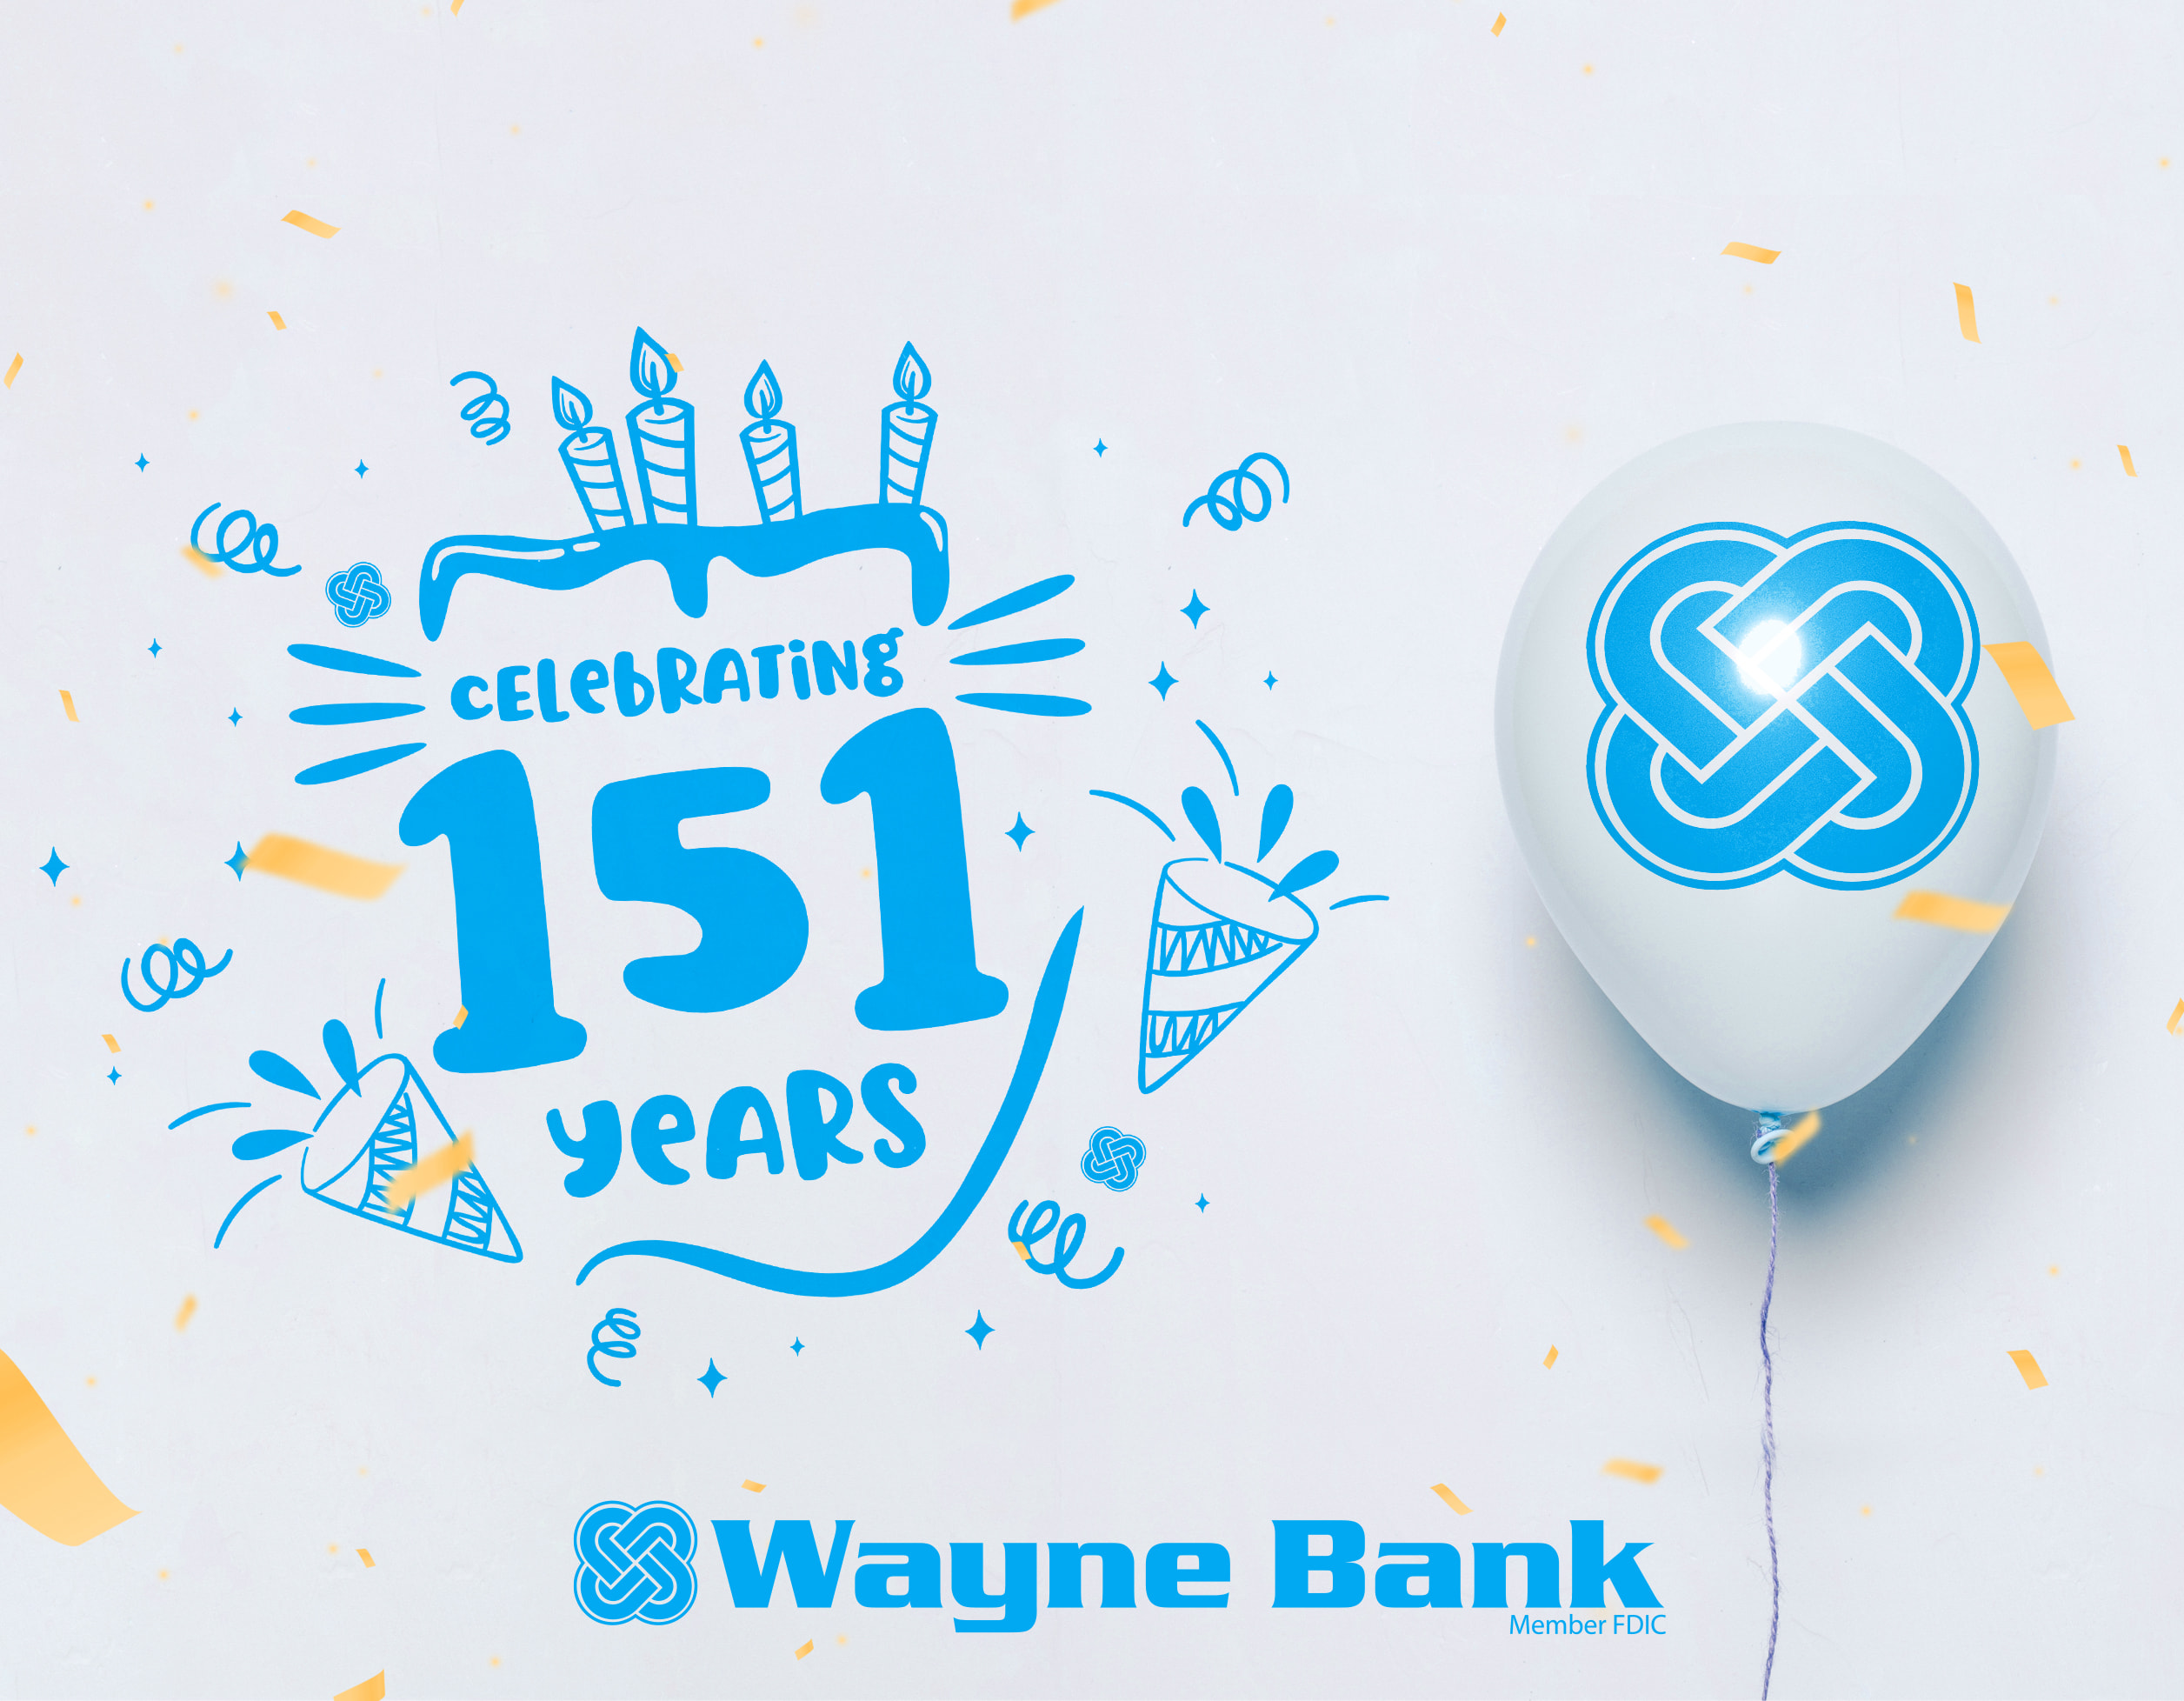 Celebrating 151 Years with Wayne Bank - Graphic with birthday elements, knot balloon.